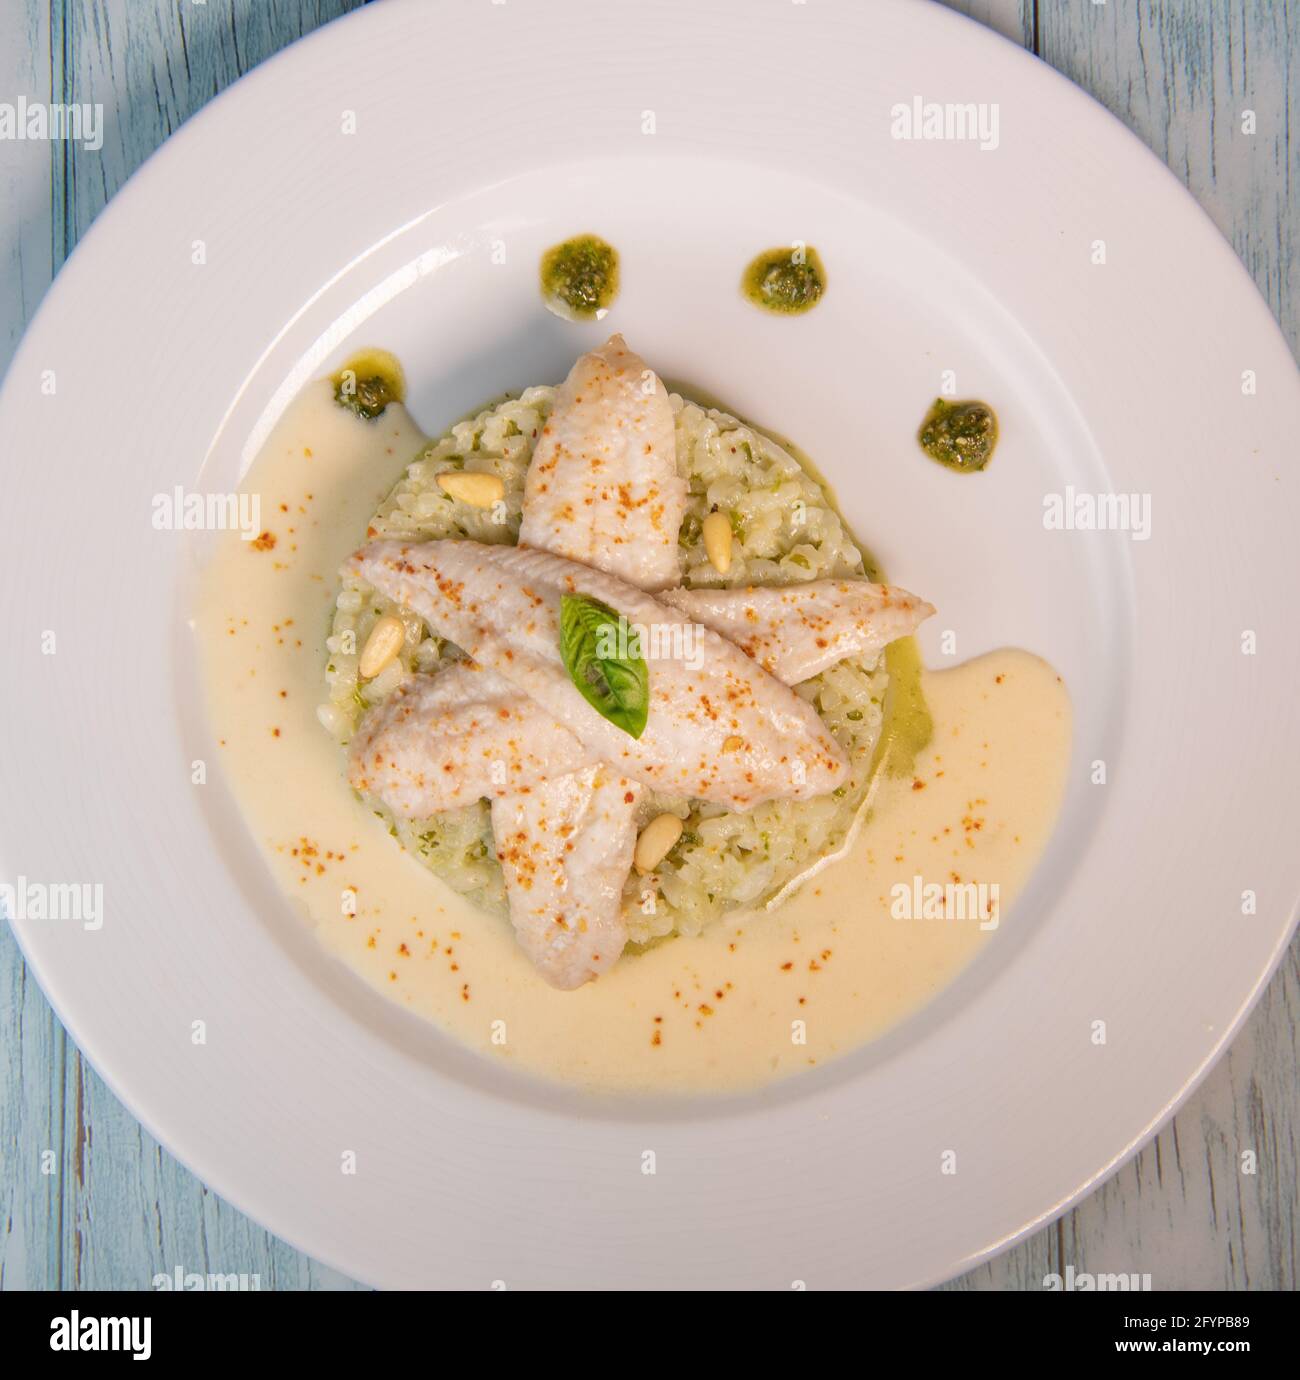 Baked sole fillet, risotto and pesto recipe Stock Photo